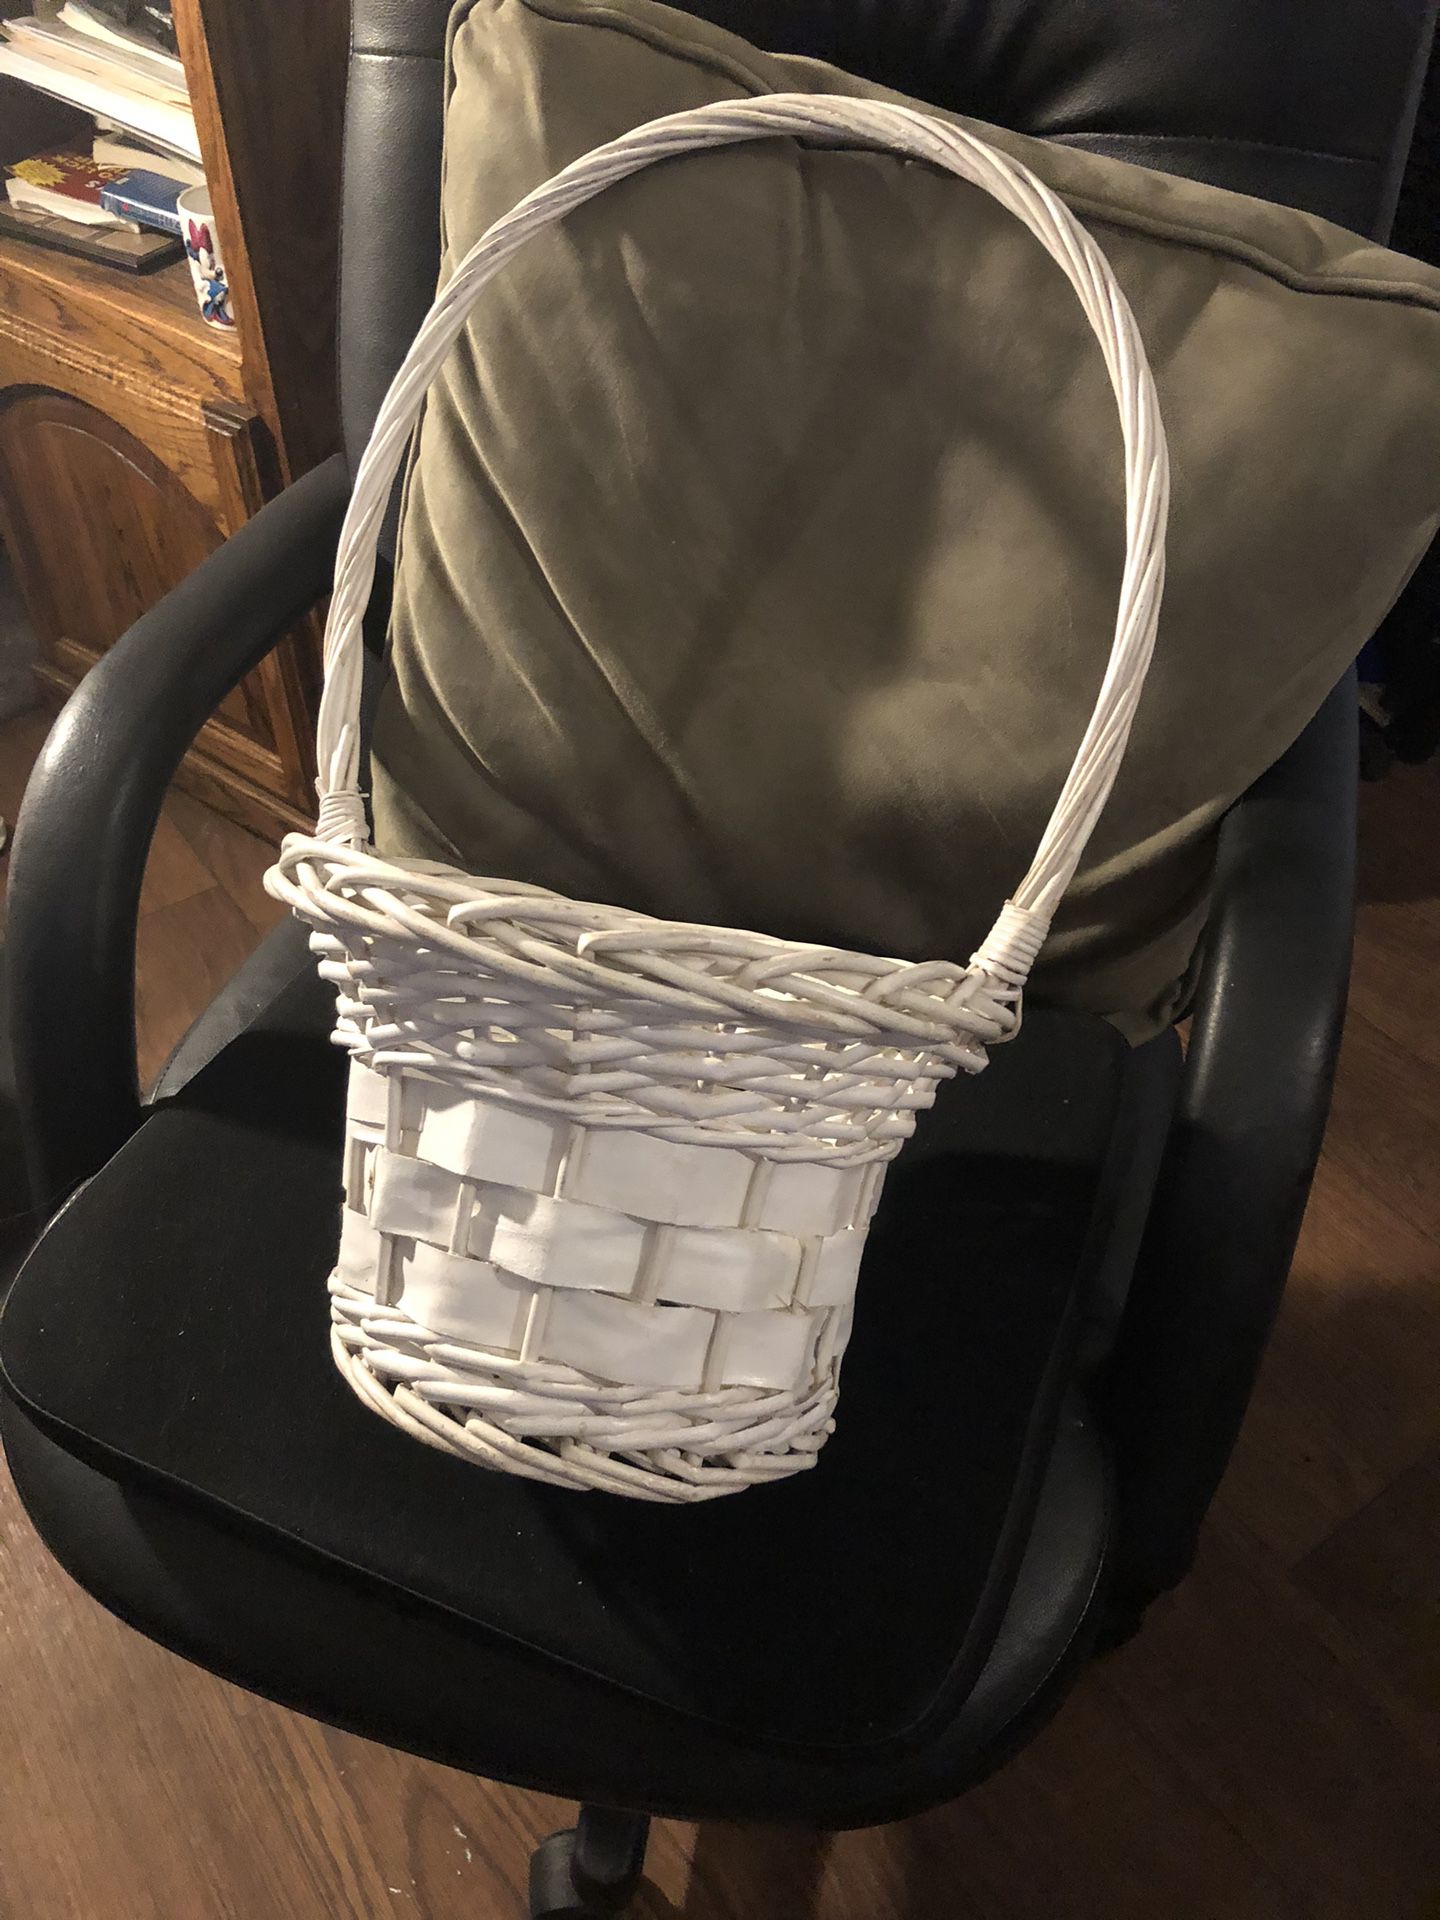 Mother’s Day DIY Present!! For Flower Arrangement Or To Be Filled With Goodies Wicker Deep White Basket With Handle